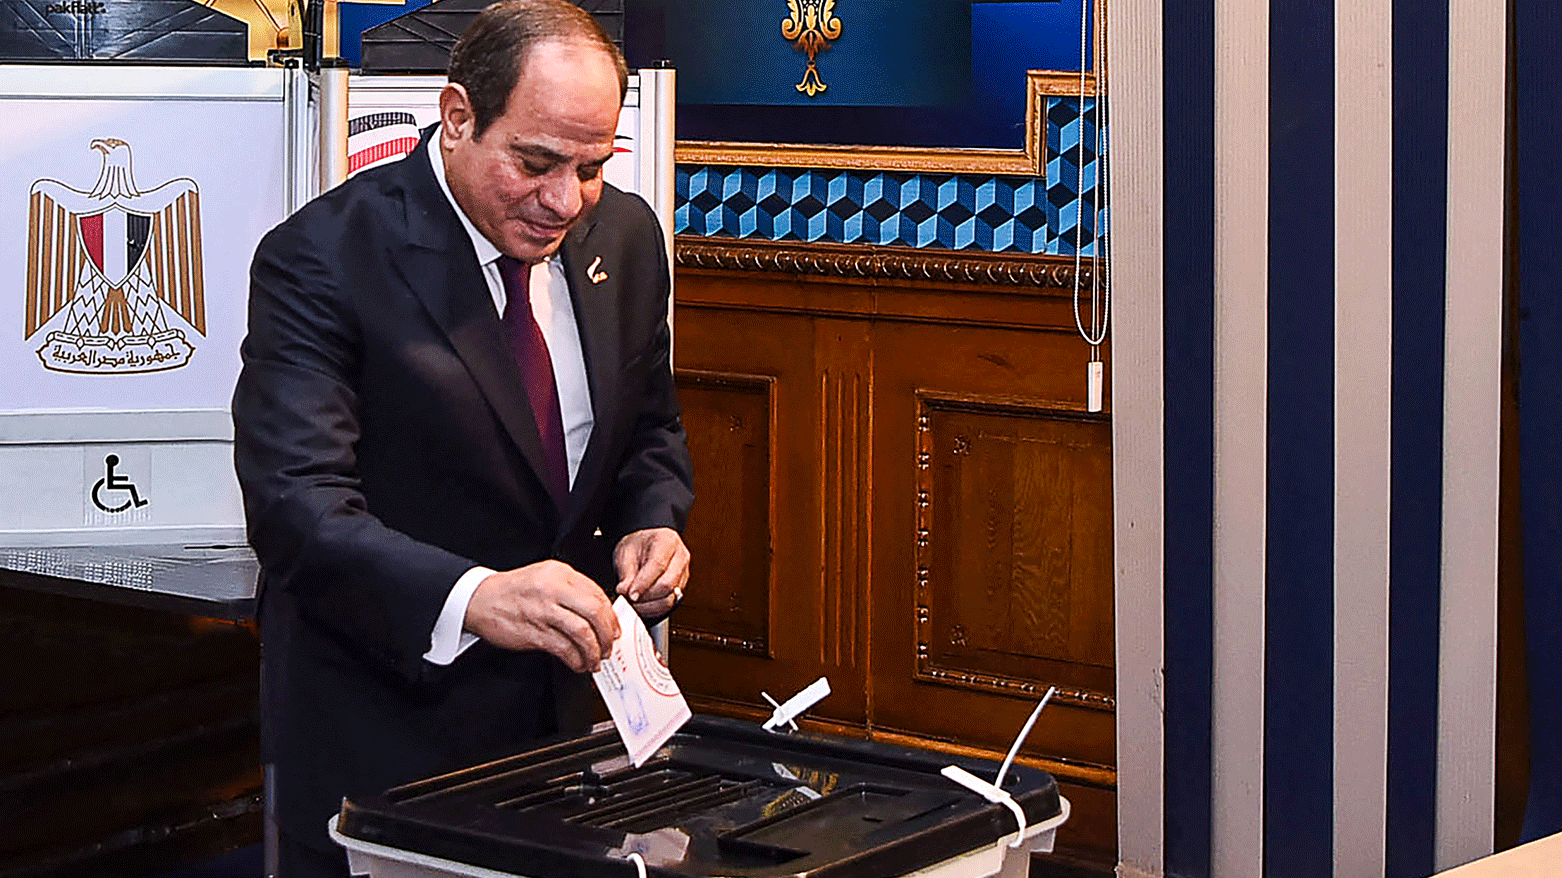 Egyptian president Abdel Fattah al-Sisi casting his vote in the presidential election at Mustafa Yousry Emmera School in Cairo. (Photo: AFP)